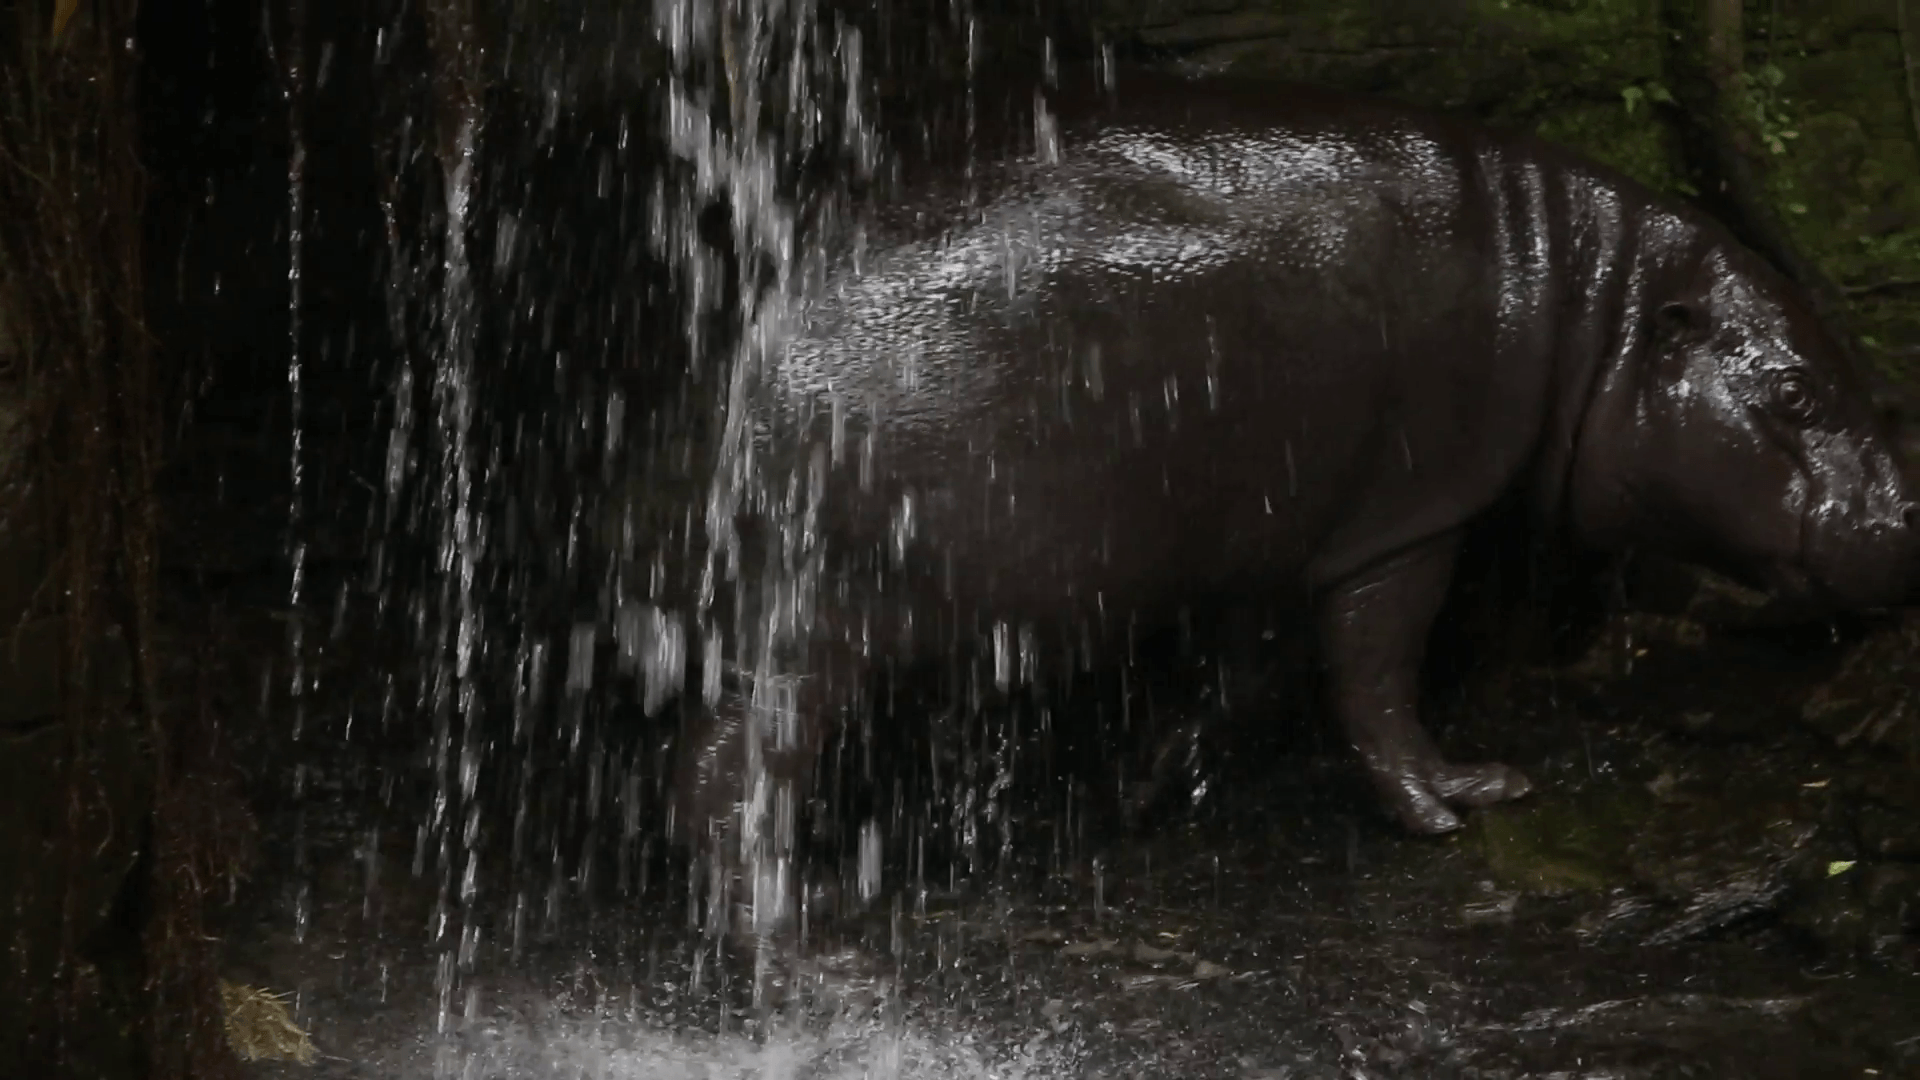 A Pygmy Hippo take a bath resting in the water in a waterfall at a